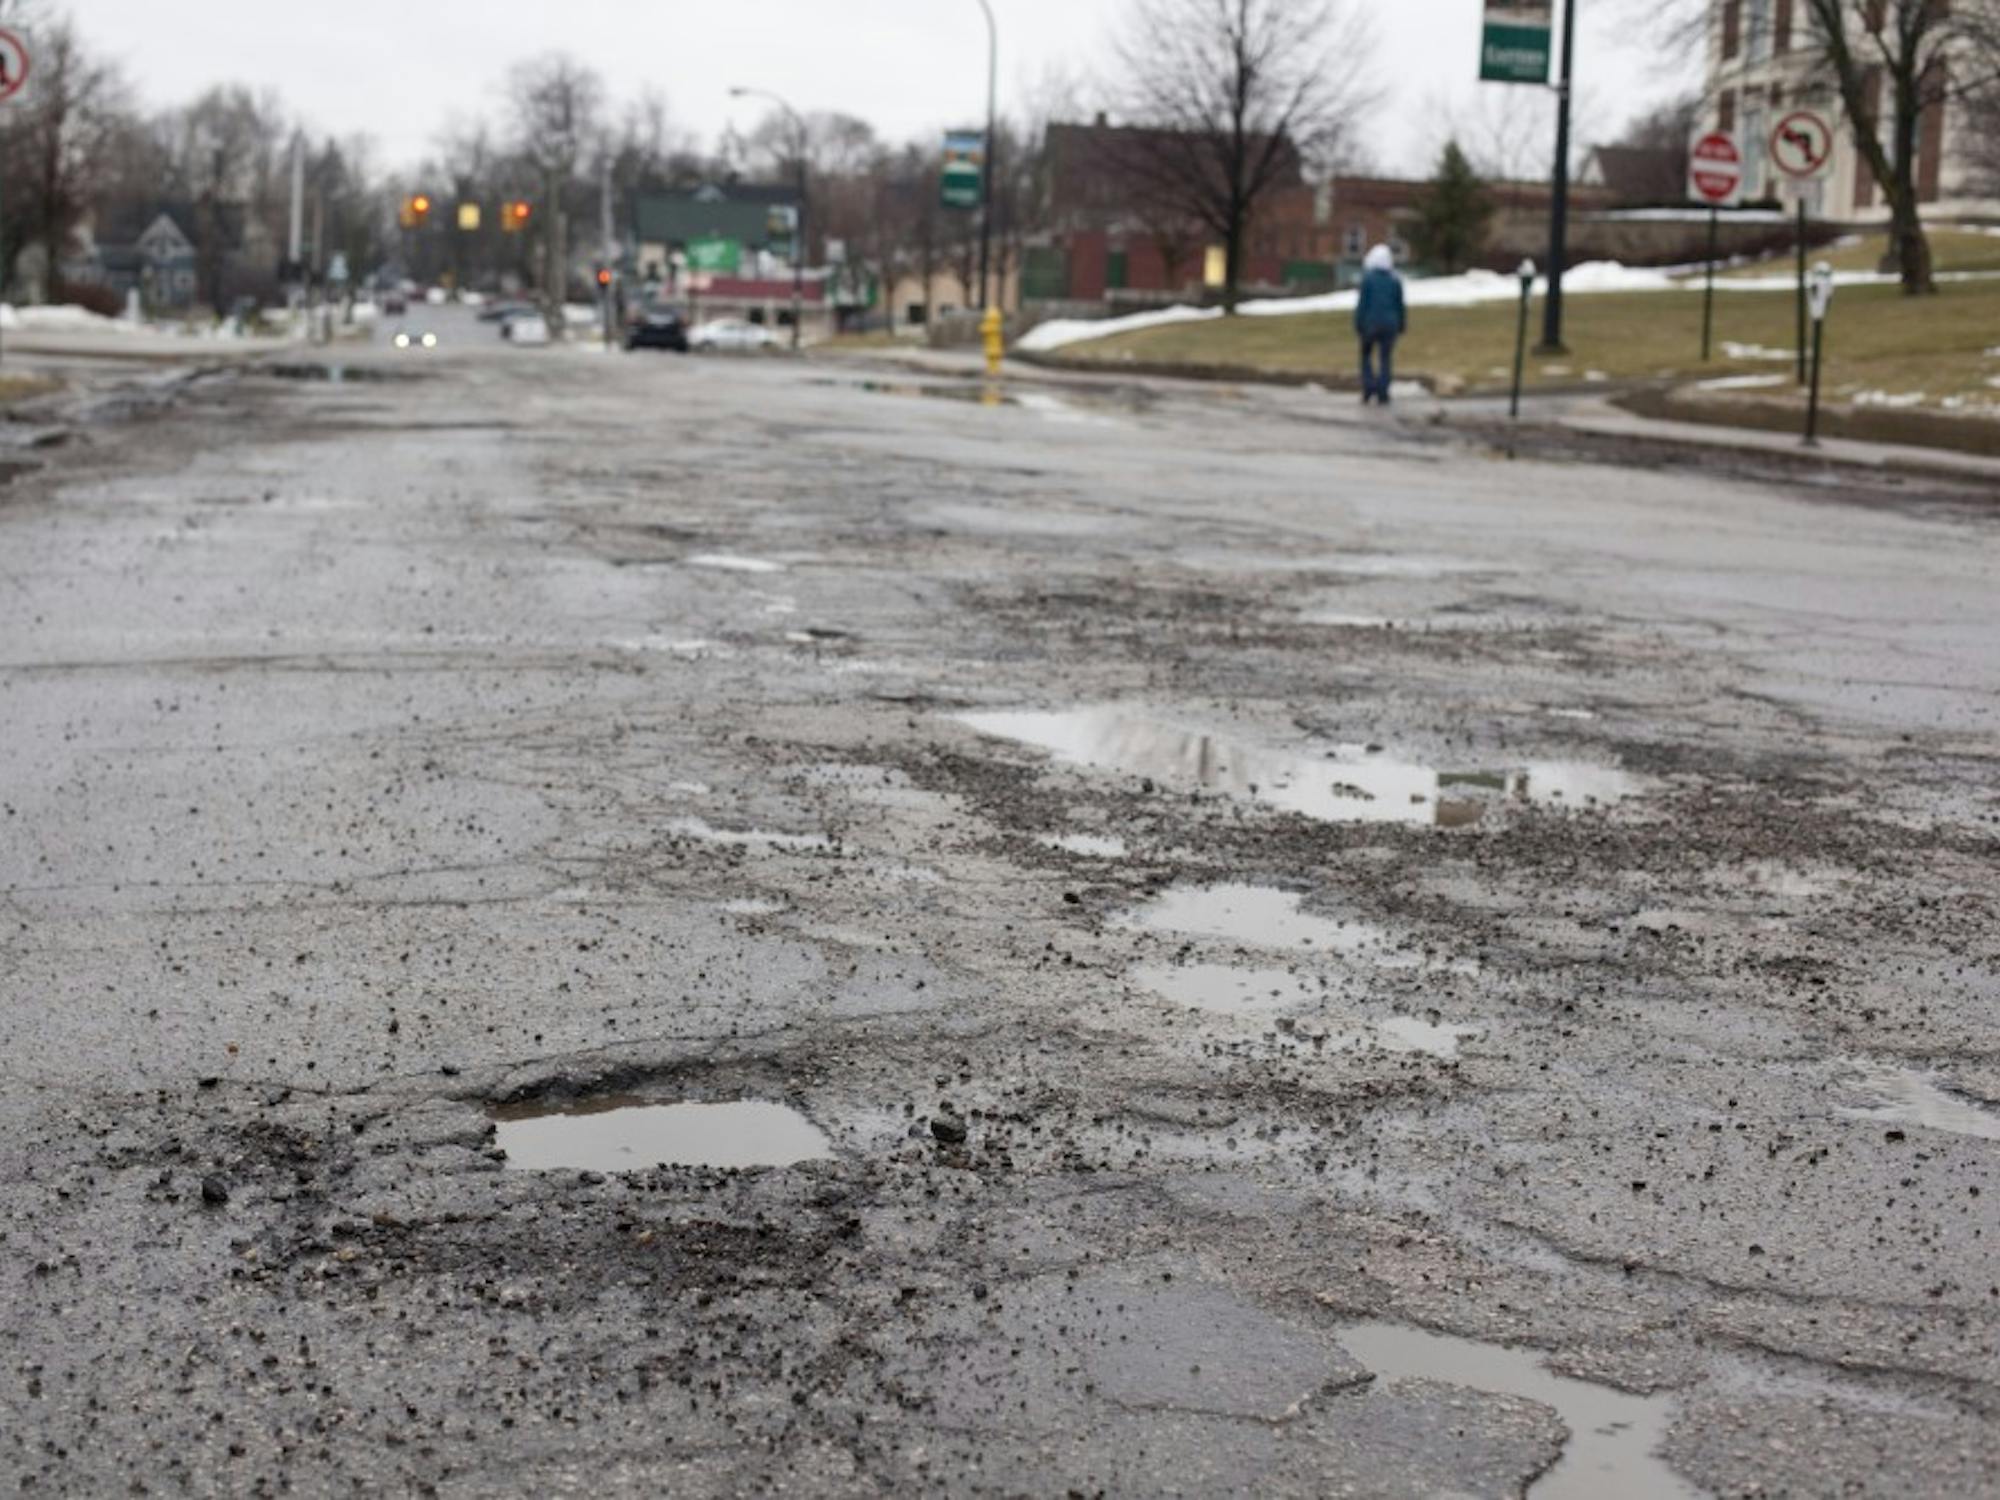 The City of Ypsilanti is planning to use money from the American Recovery and Reinvestment Act for the  $320,000 project. Cross walks will also be added near Forrest Avenue, Cross Street and in front of Pease.